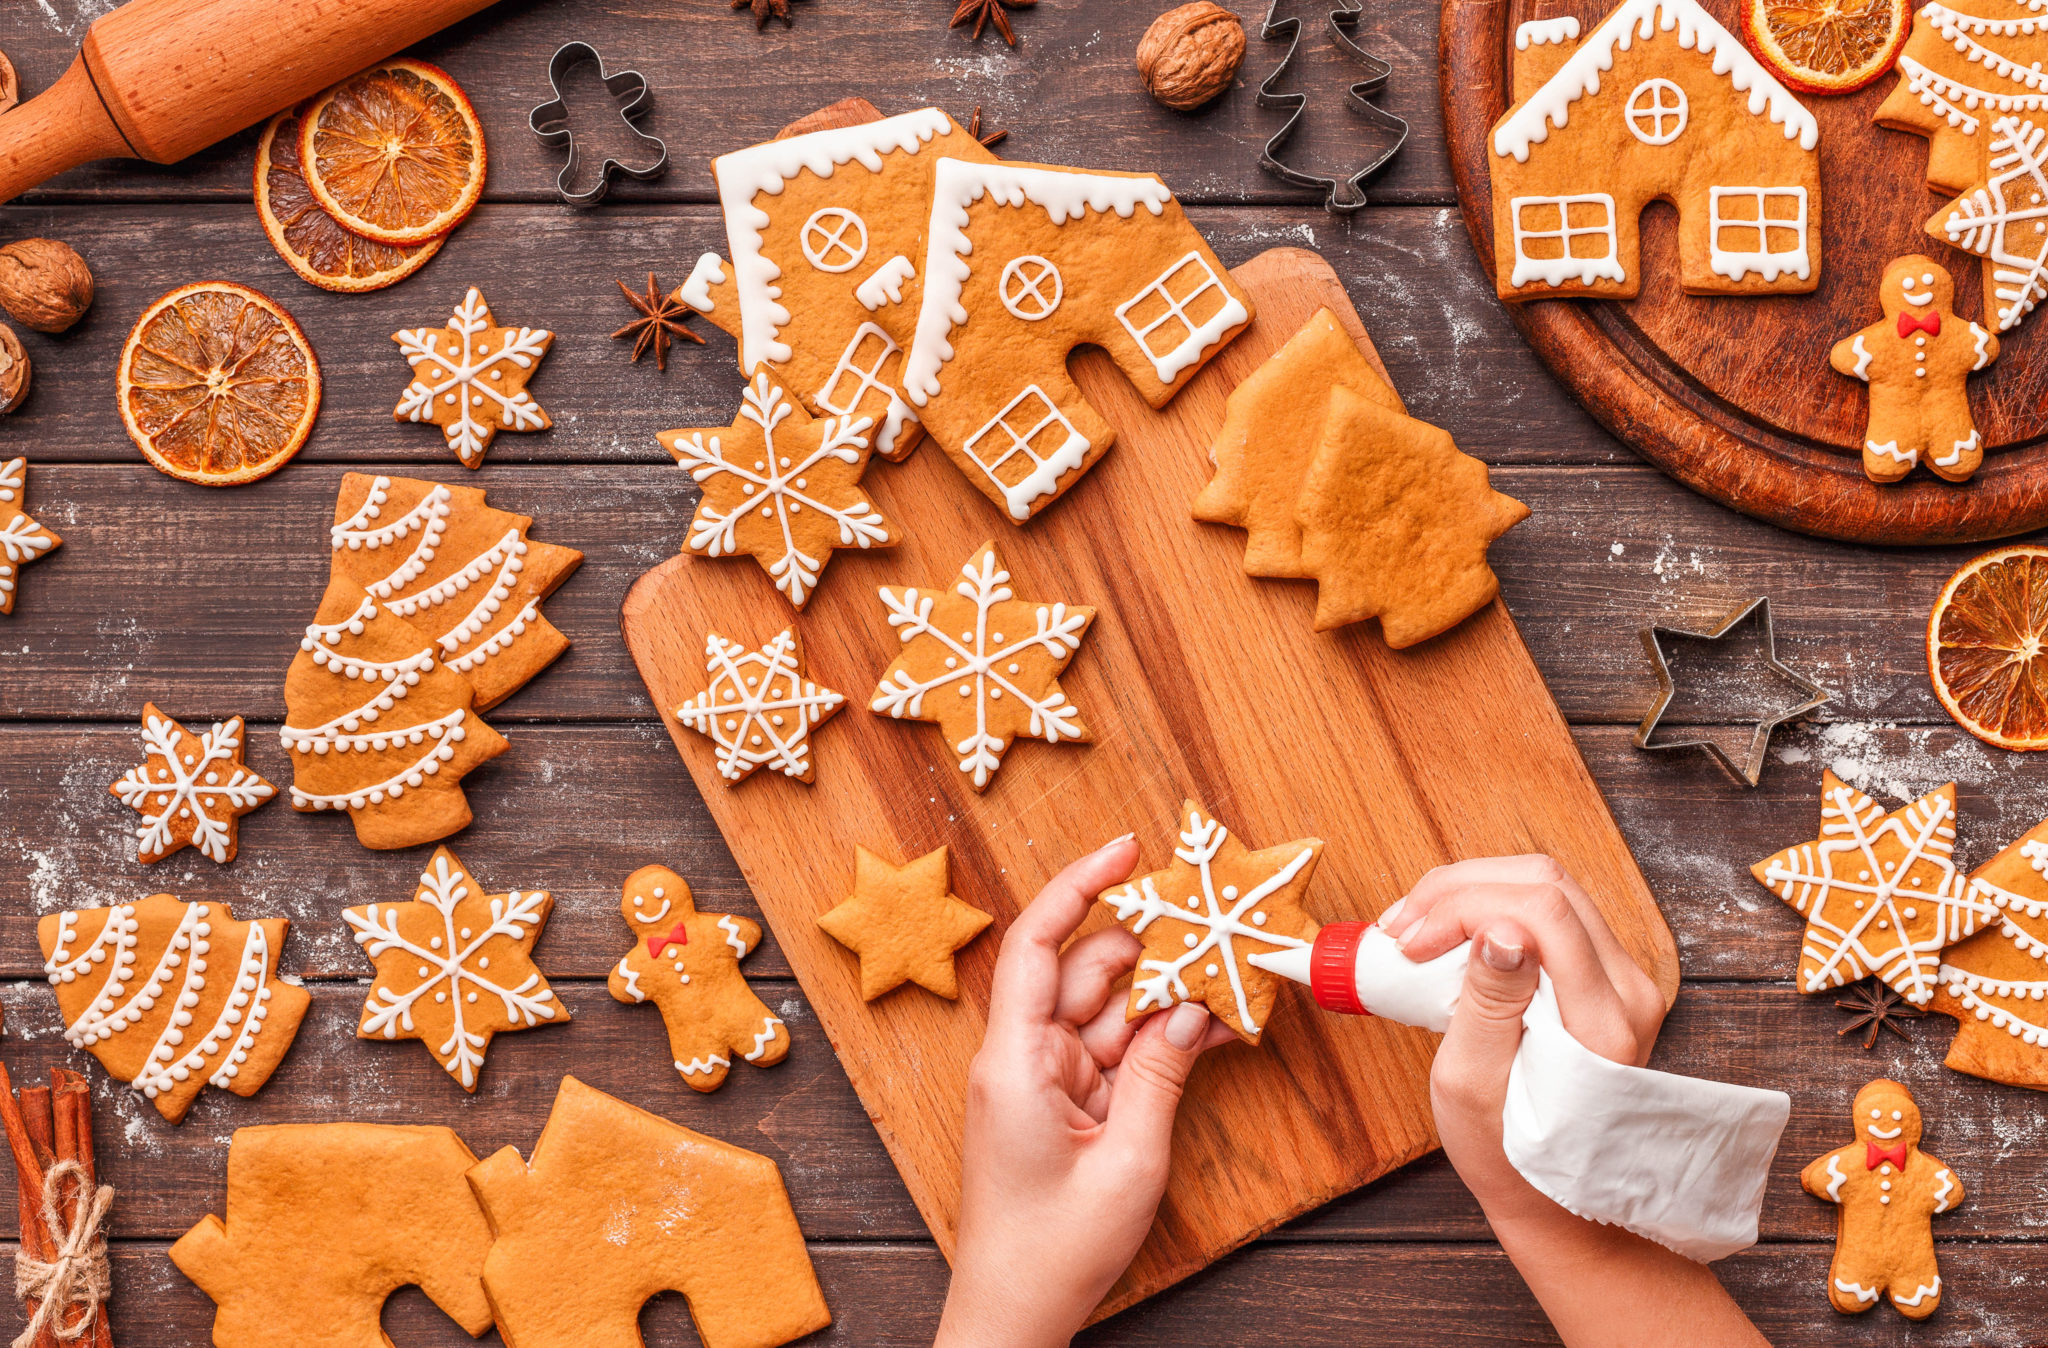 Gingerbread Decorating Day a day set aside to decorate your gingerbread baked items. #GingerbreadDecoratingDay